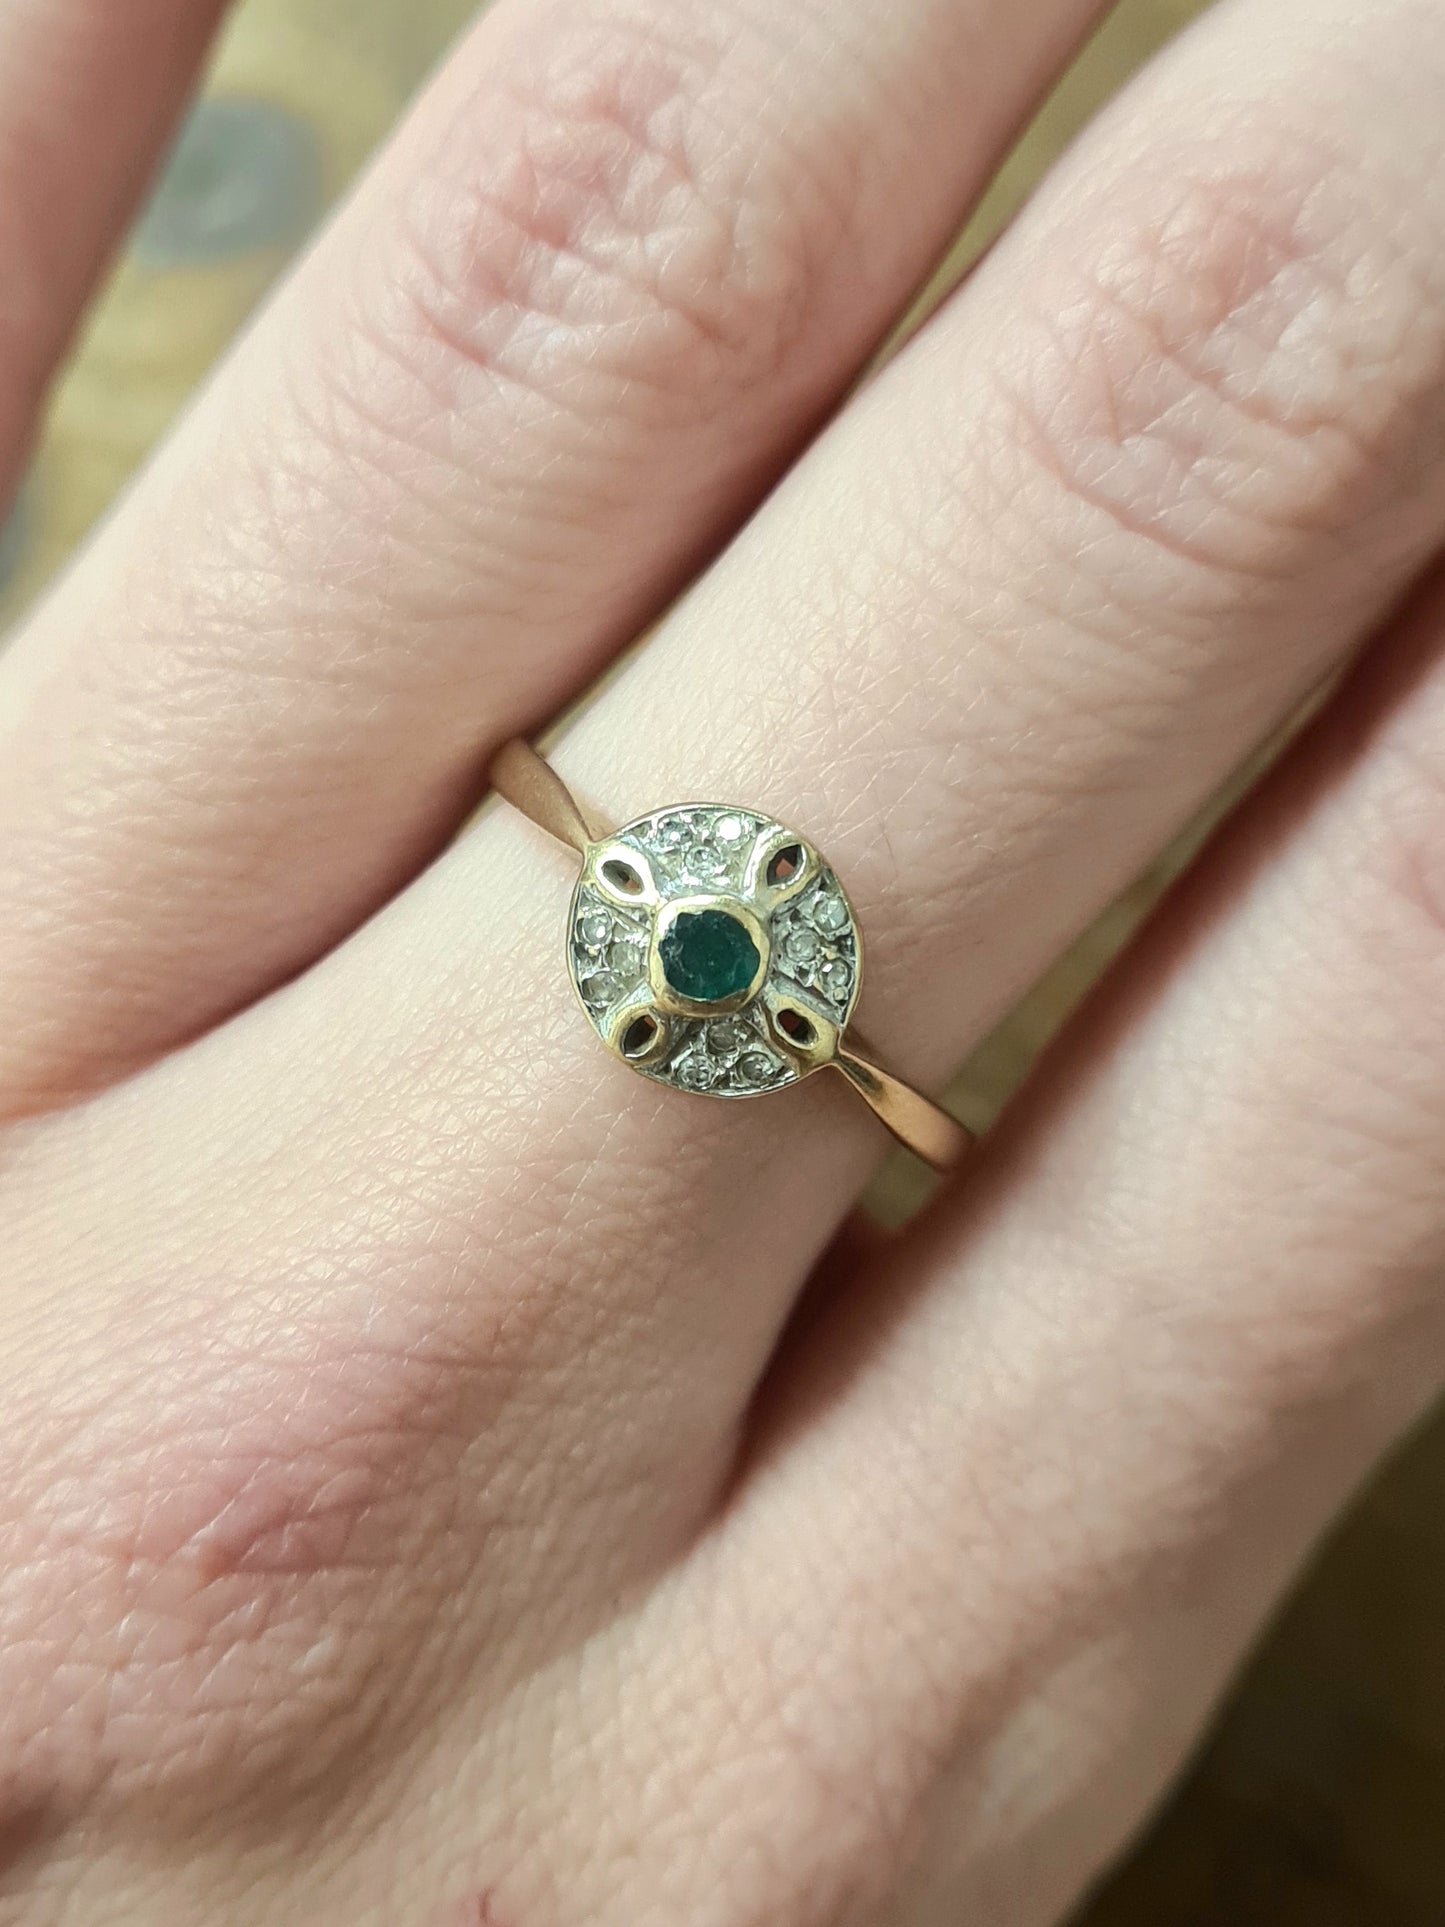 Vintage Diamonds and Green Stone 9ct Gold Hallmarked Ring